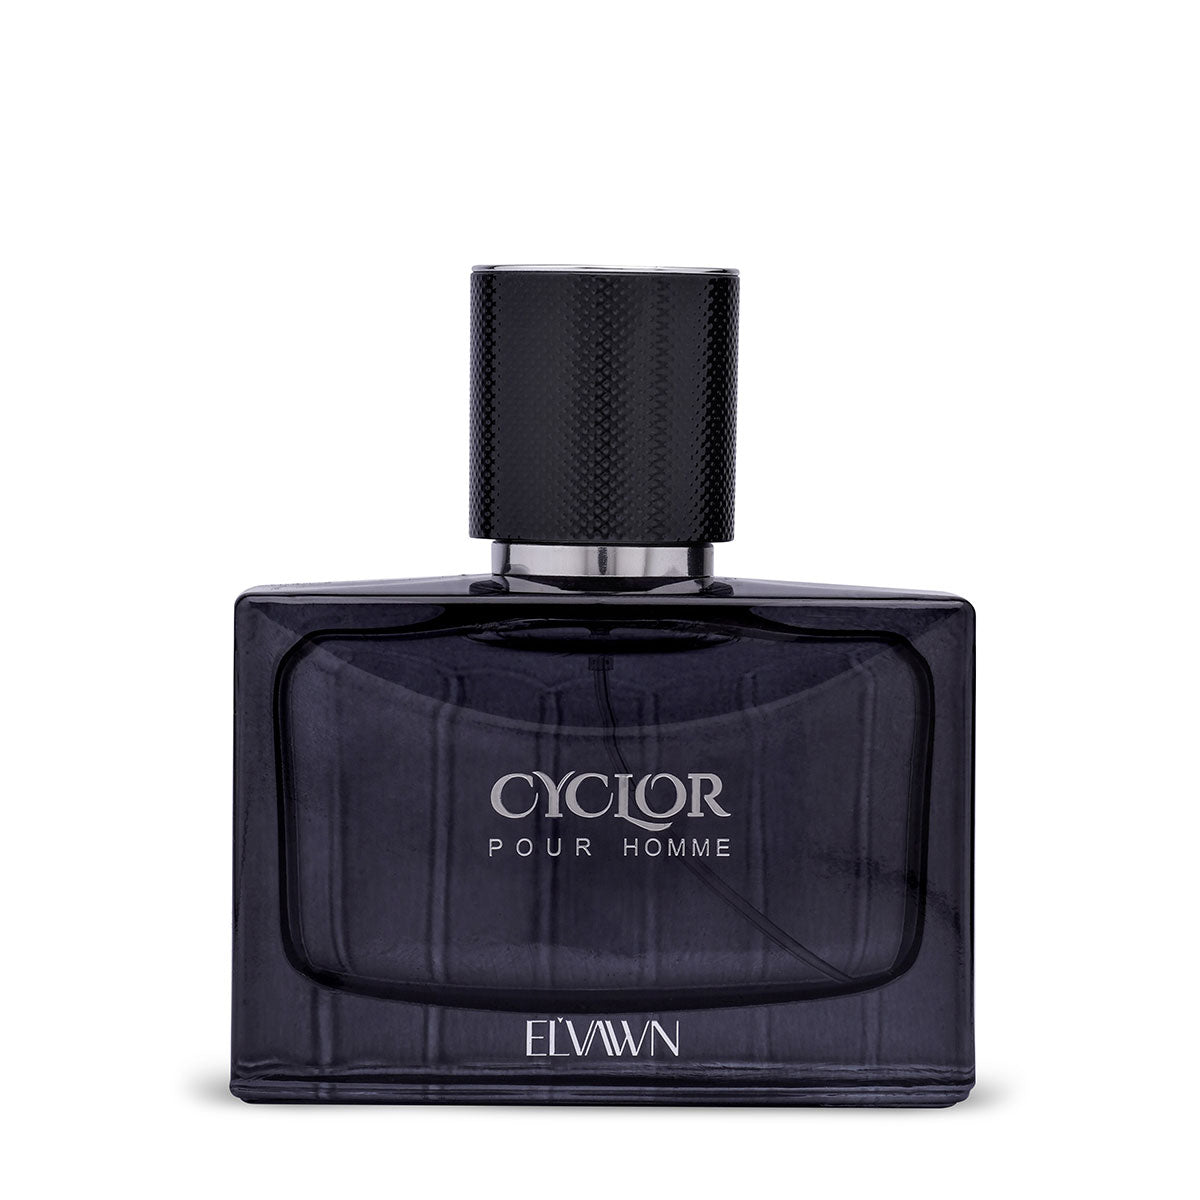 Cyclor Pour Homme By Elvawn UAE